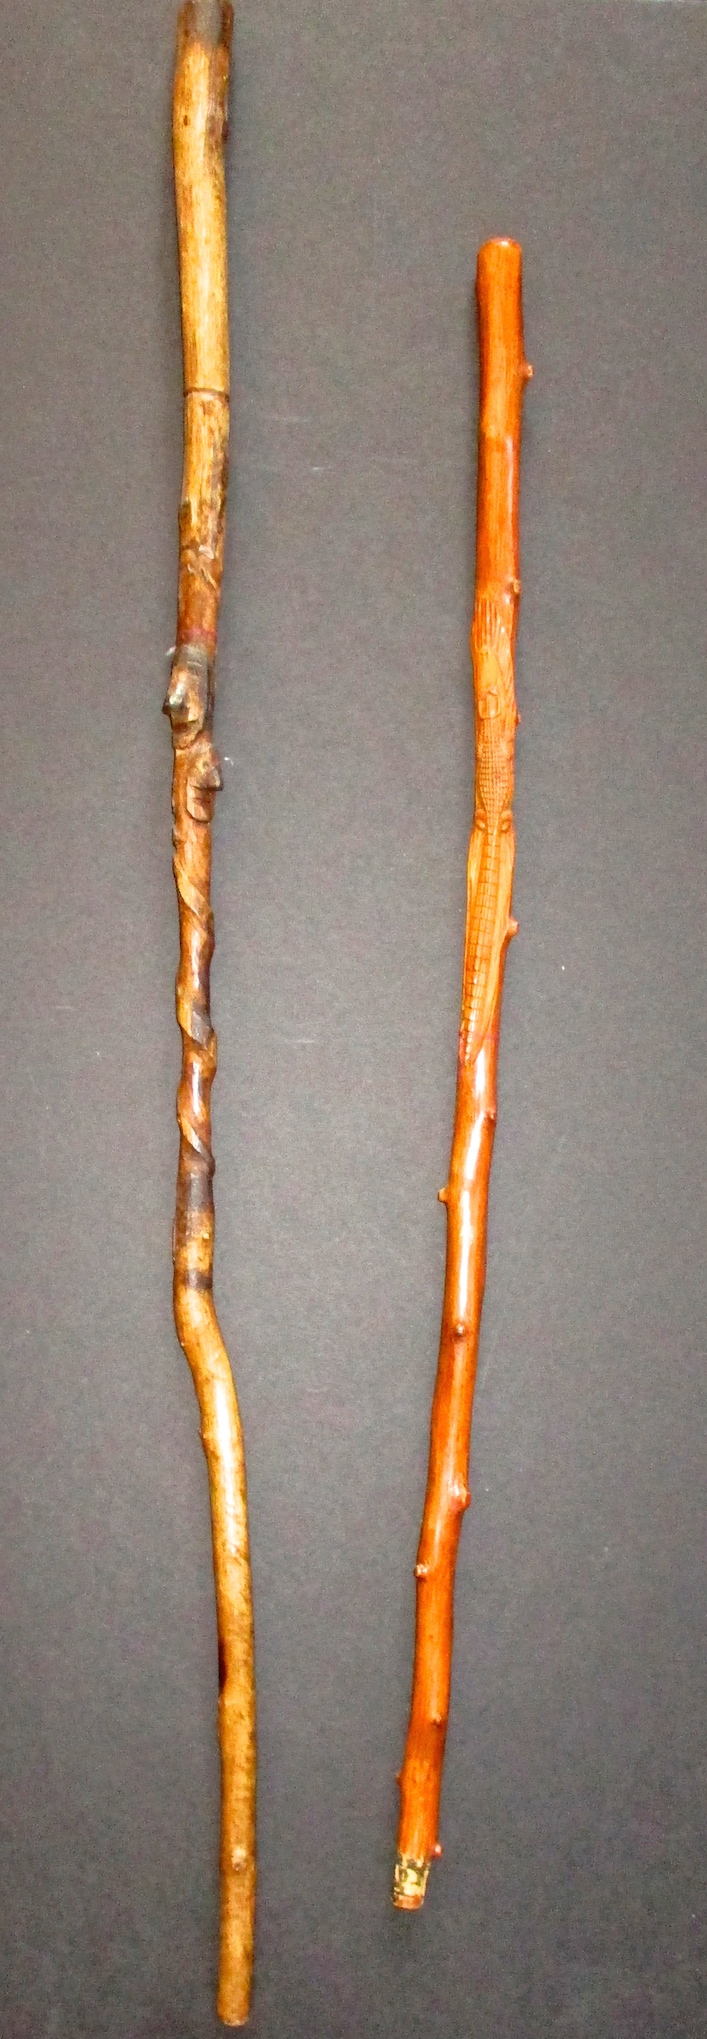 Walking Stick w/Hand-carved Heads (L) and Walking Stick w/Hand-carved Alligator (R)